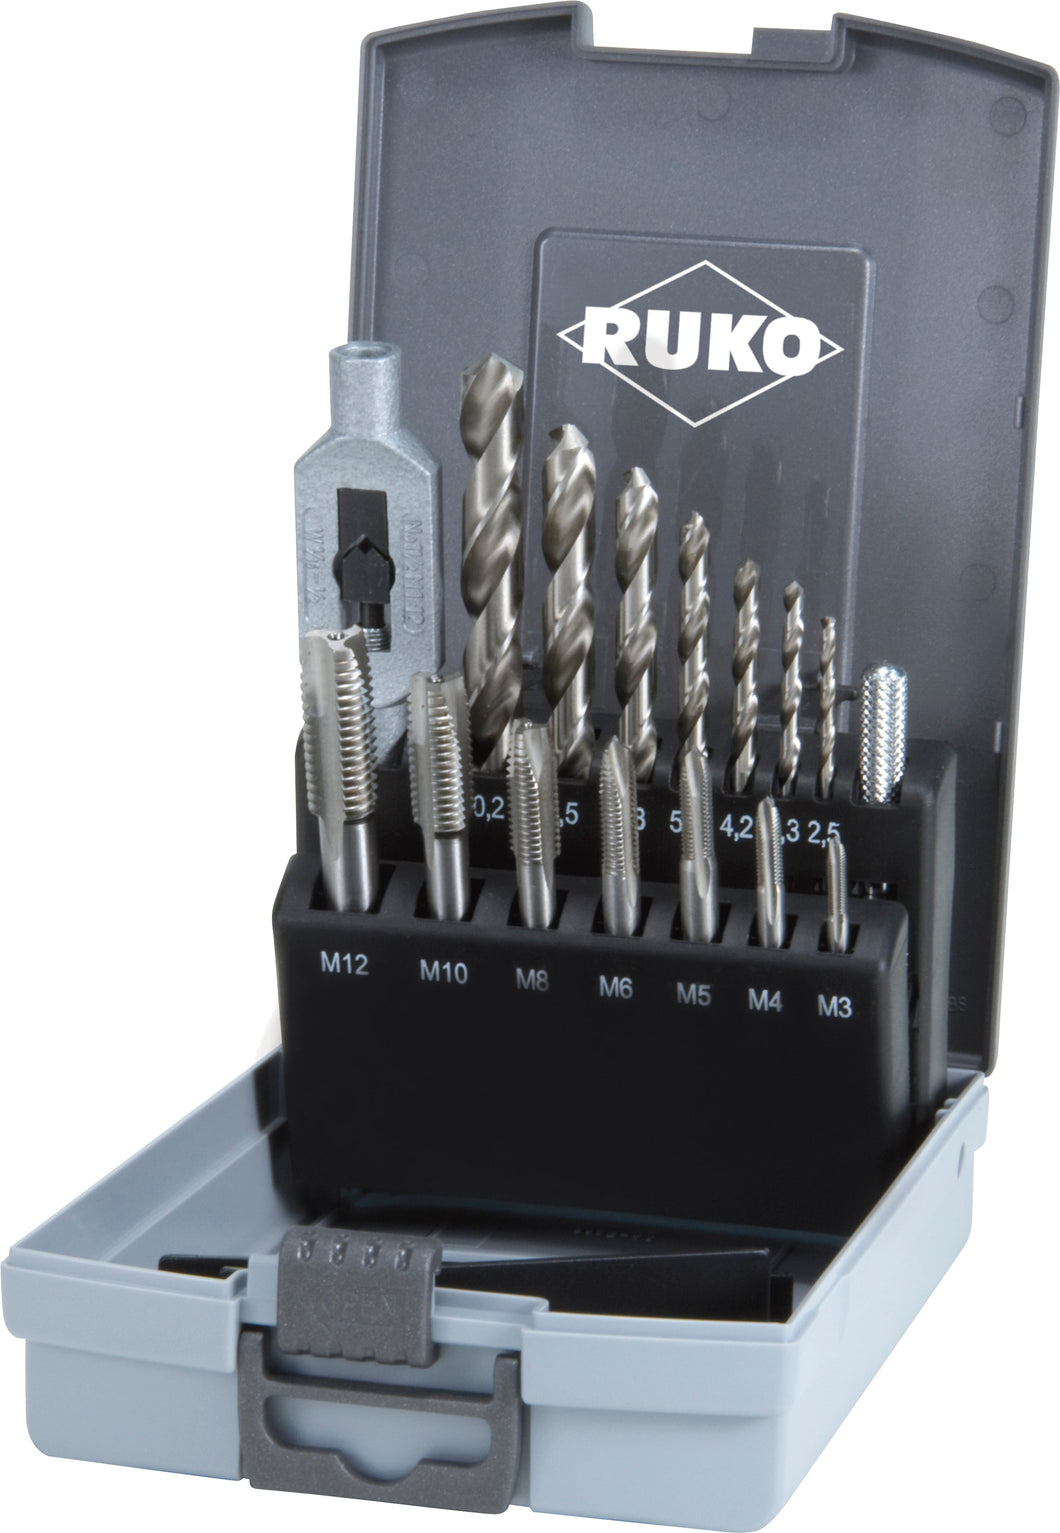 RUKO M3-M12 Complete Tapping Set